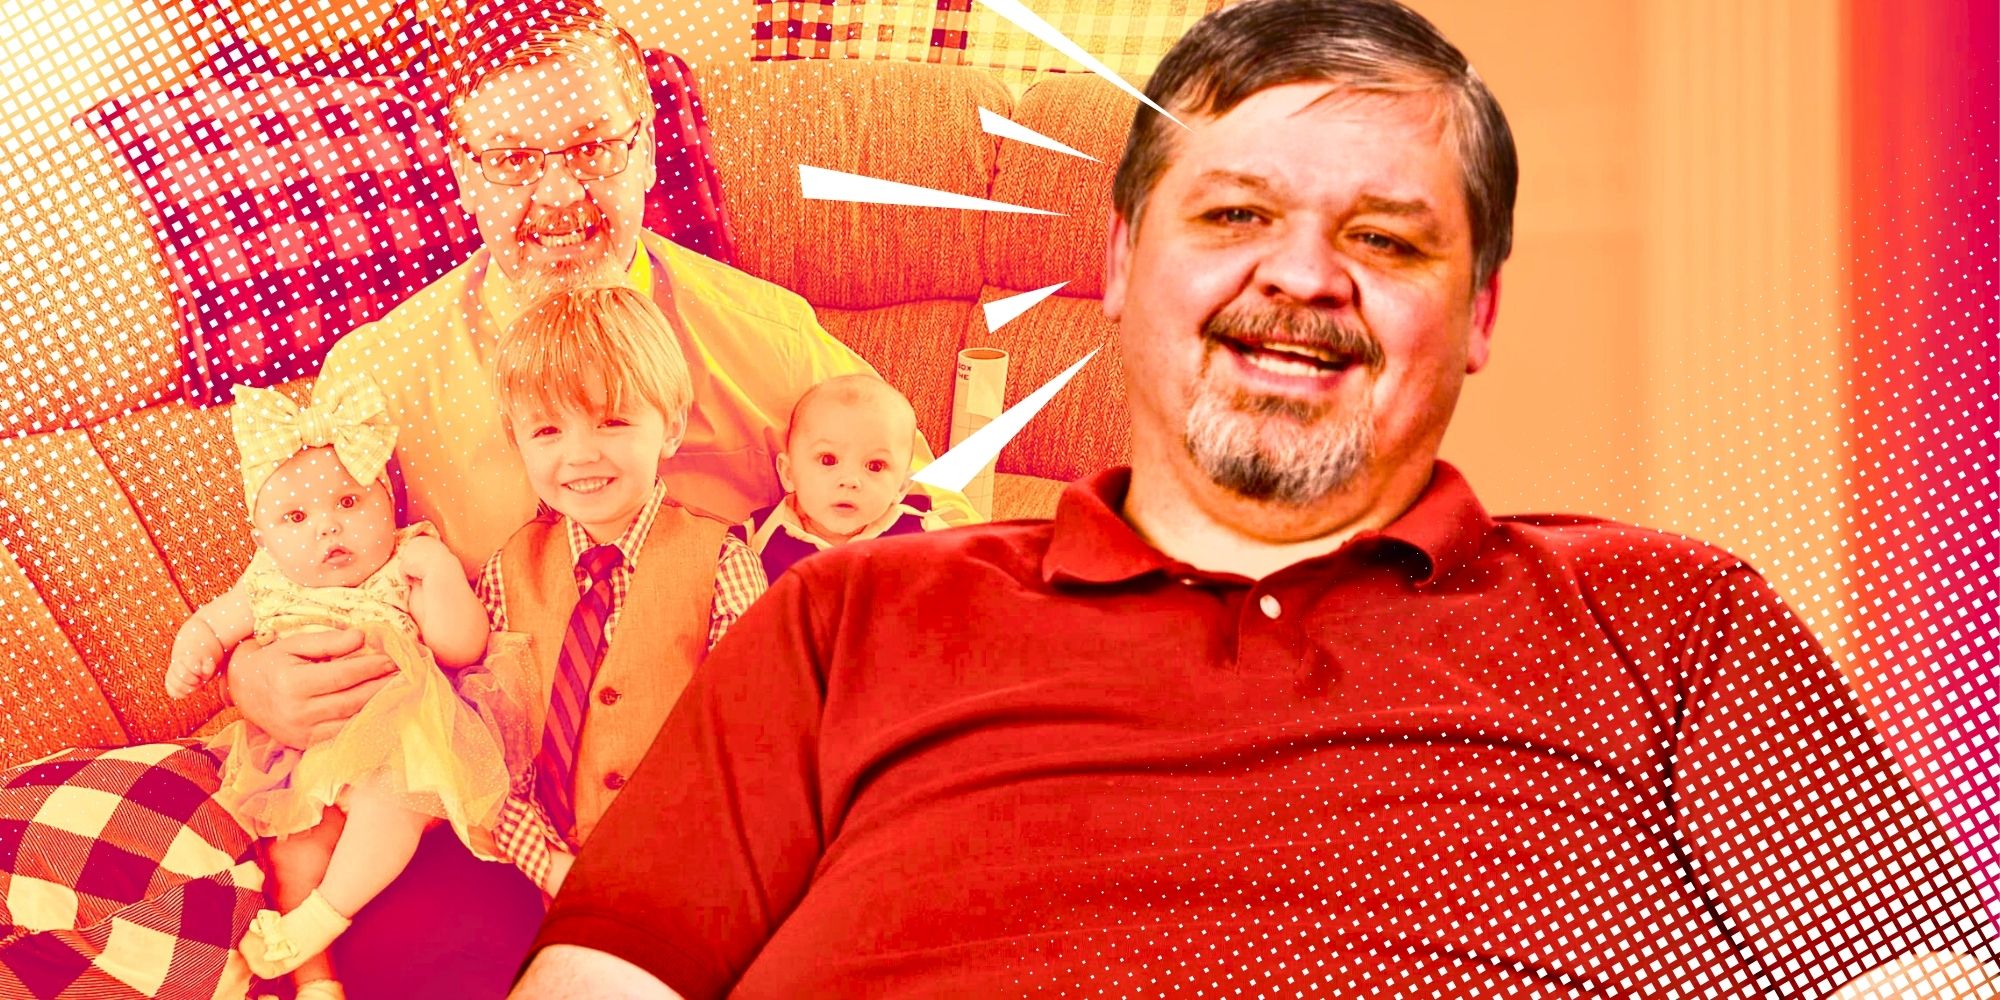 Video of Chris Combs of the 1000 Lb sisters laughing and styling with his grandchildren